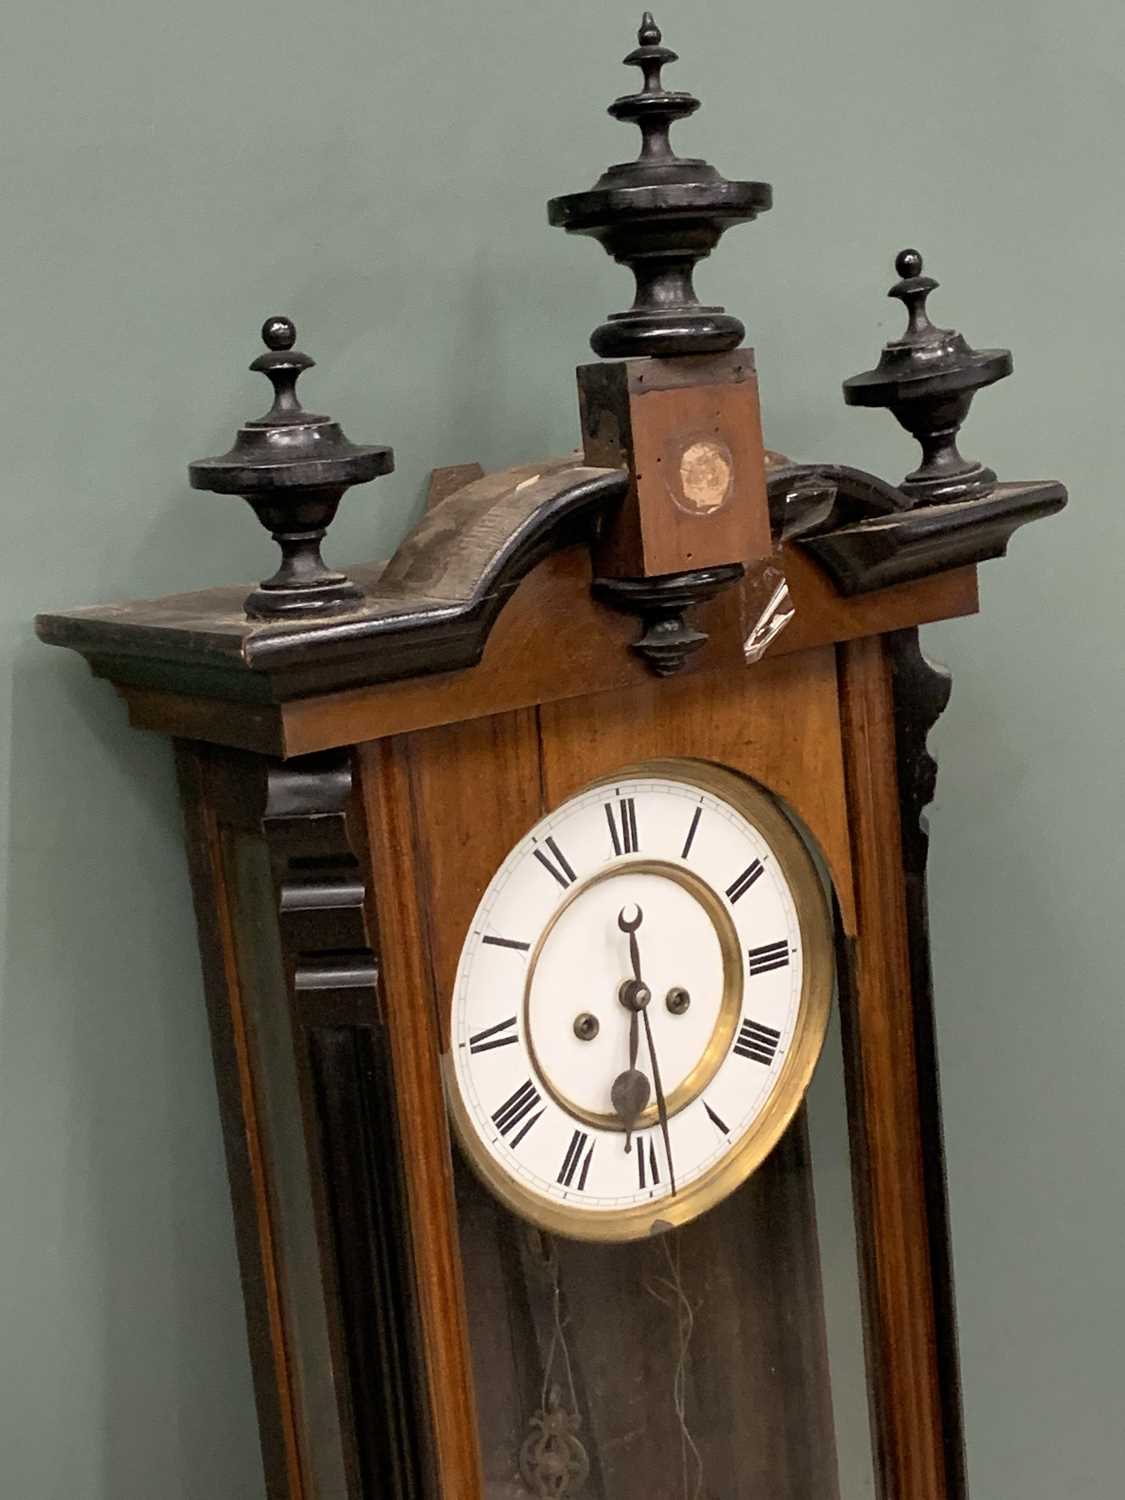 LATE VICTORIAN VIENNA TYPE WALL CLOCK, walnut and ebonised case, white dial, Roman numerals, twin - Image 2 of 6